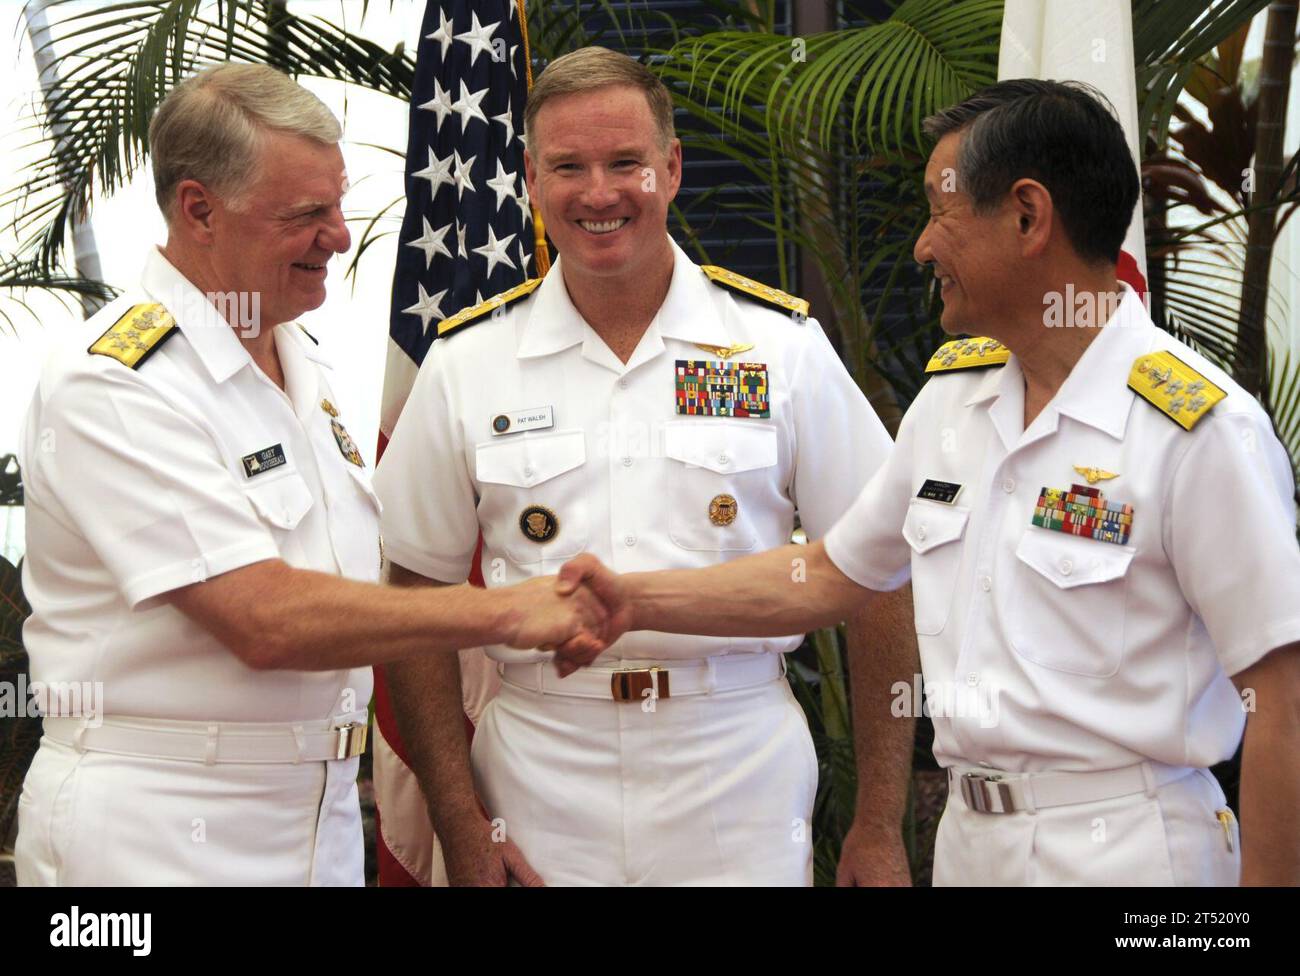 1006097498L-194 PEARL HARBOR (June 9, 2010) Chief of Naval Operations (CNO) Adm. Gary Roughead; left, Adm. Patrick Walsh, commander of U.S. Pacific Fleet; and Adm. Keiji Akahoshi, chief of maritime staff for the Japan Maritime Self-Defense Force, greet during the 2010 U.S.-Japan Junior Officers Symposium.  The Japan Maritime Self-Defense Force Training Squadron arrived at Joint Base Pearl Harbor-Hickam to participate in various professional exchanges and social events with U.S. counterparts. This year marks the 50th anniversary of the U.S. and Japan Treaty of Mutual Cooperation of Security tha Stock Photo